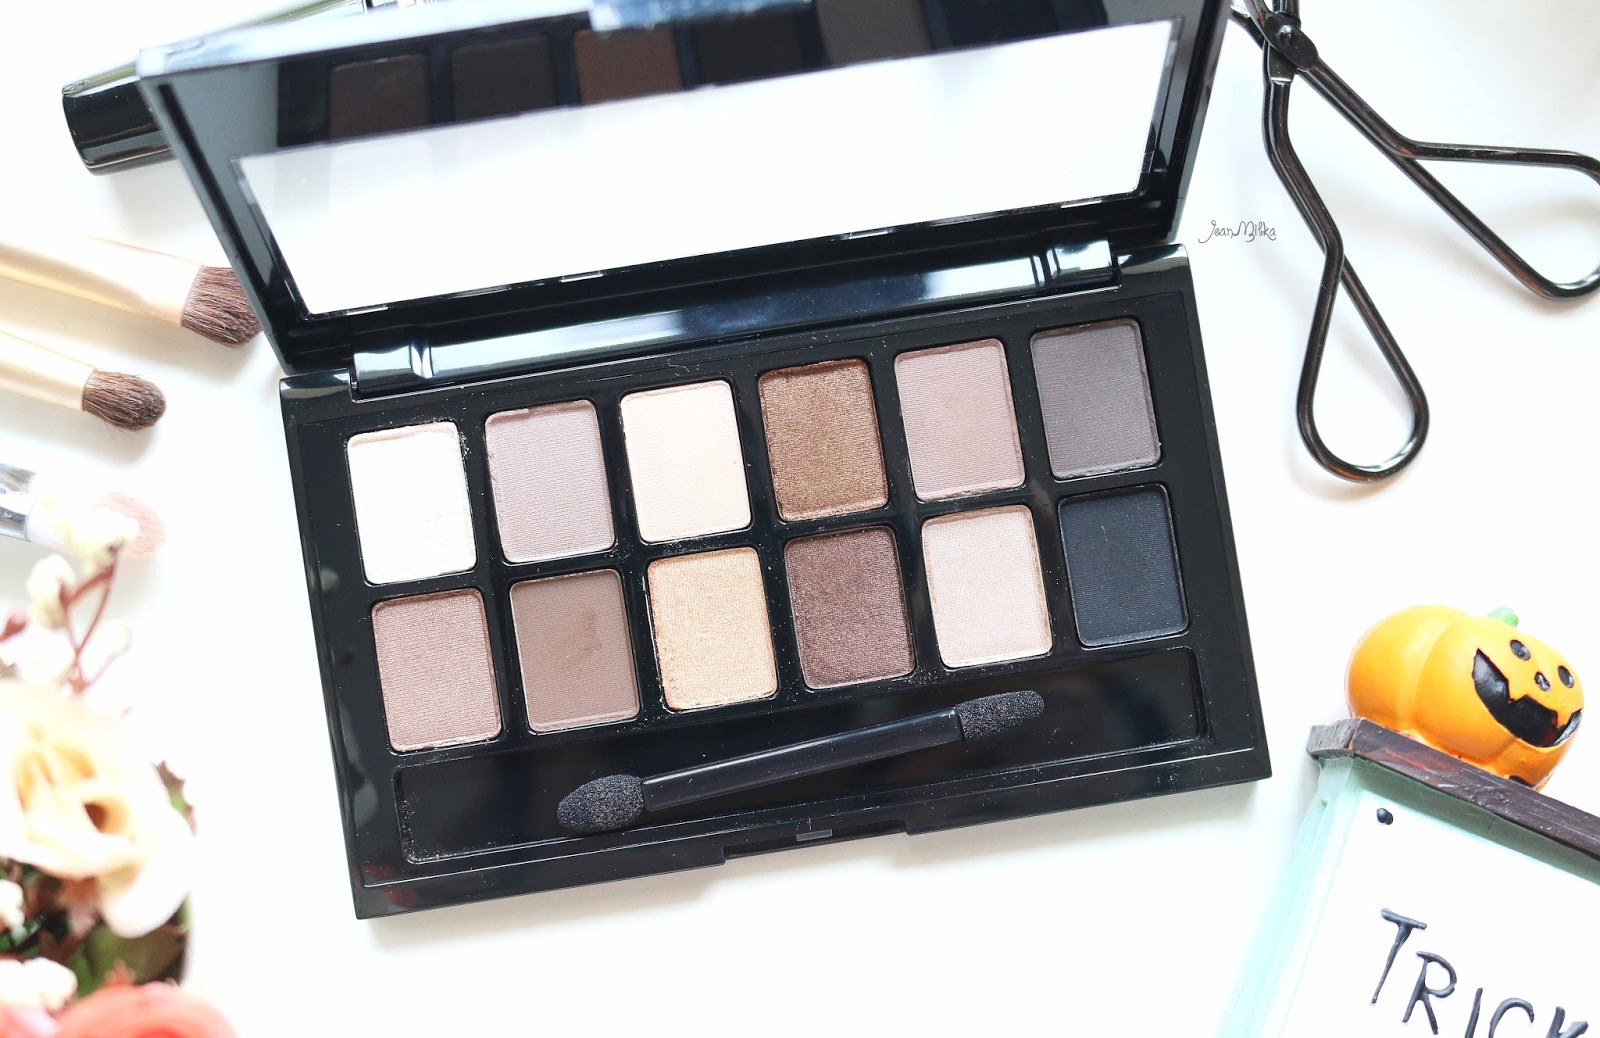 Maybelline The Nudes Palette Review And Swatches Jean Milka